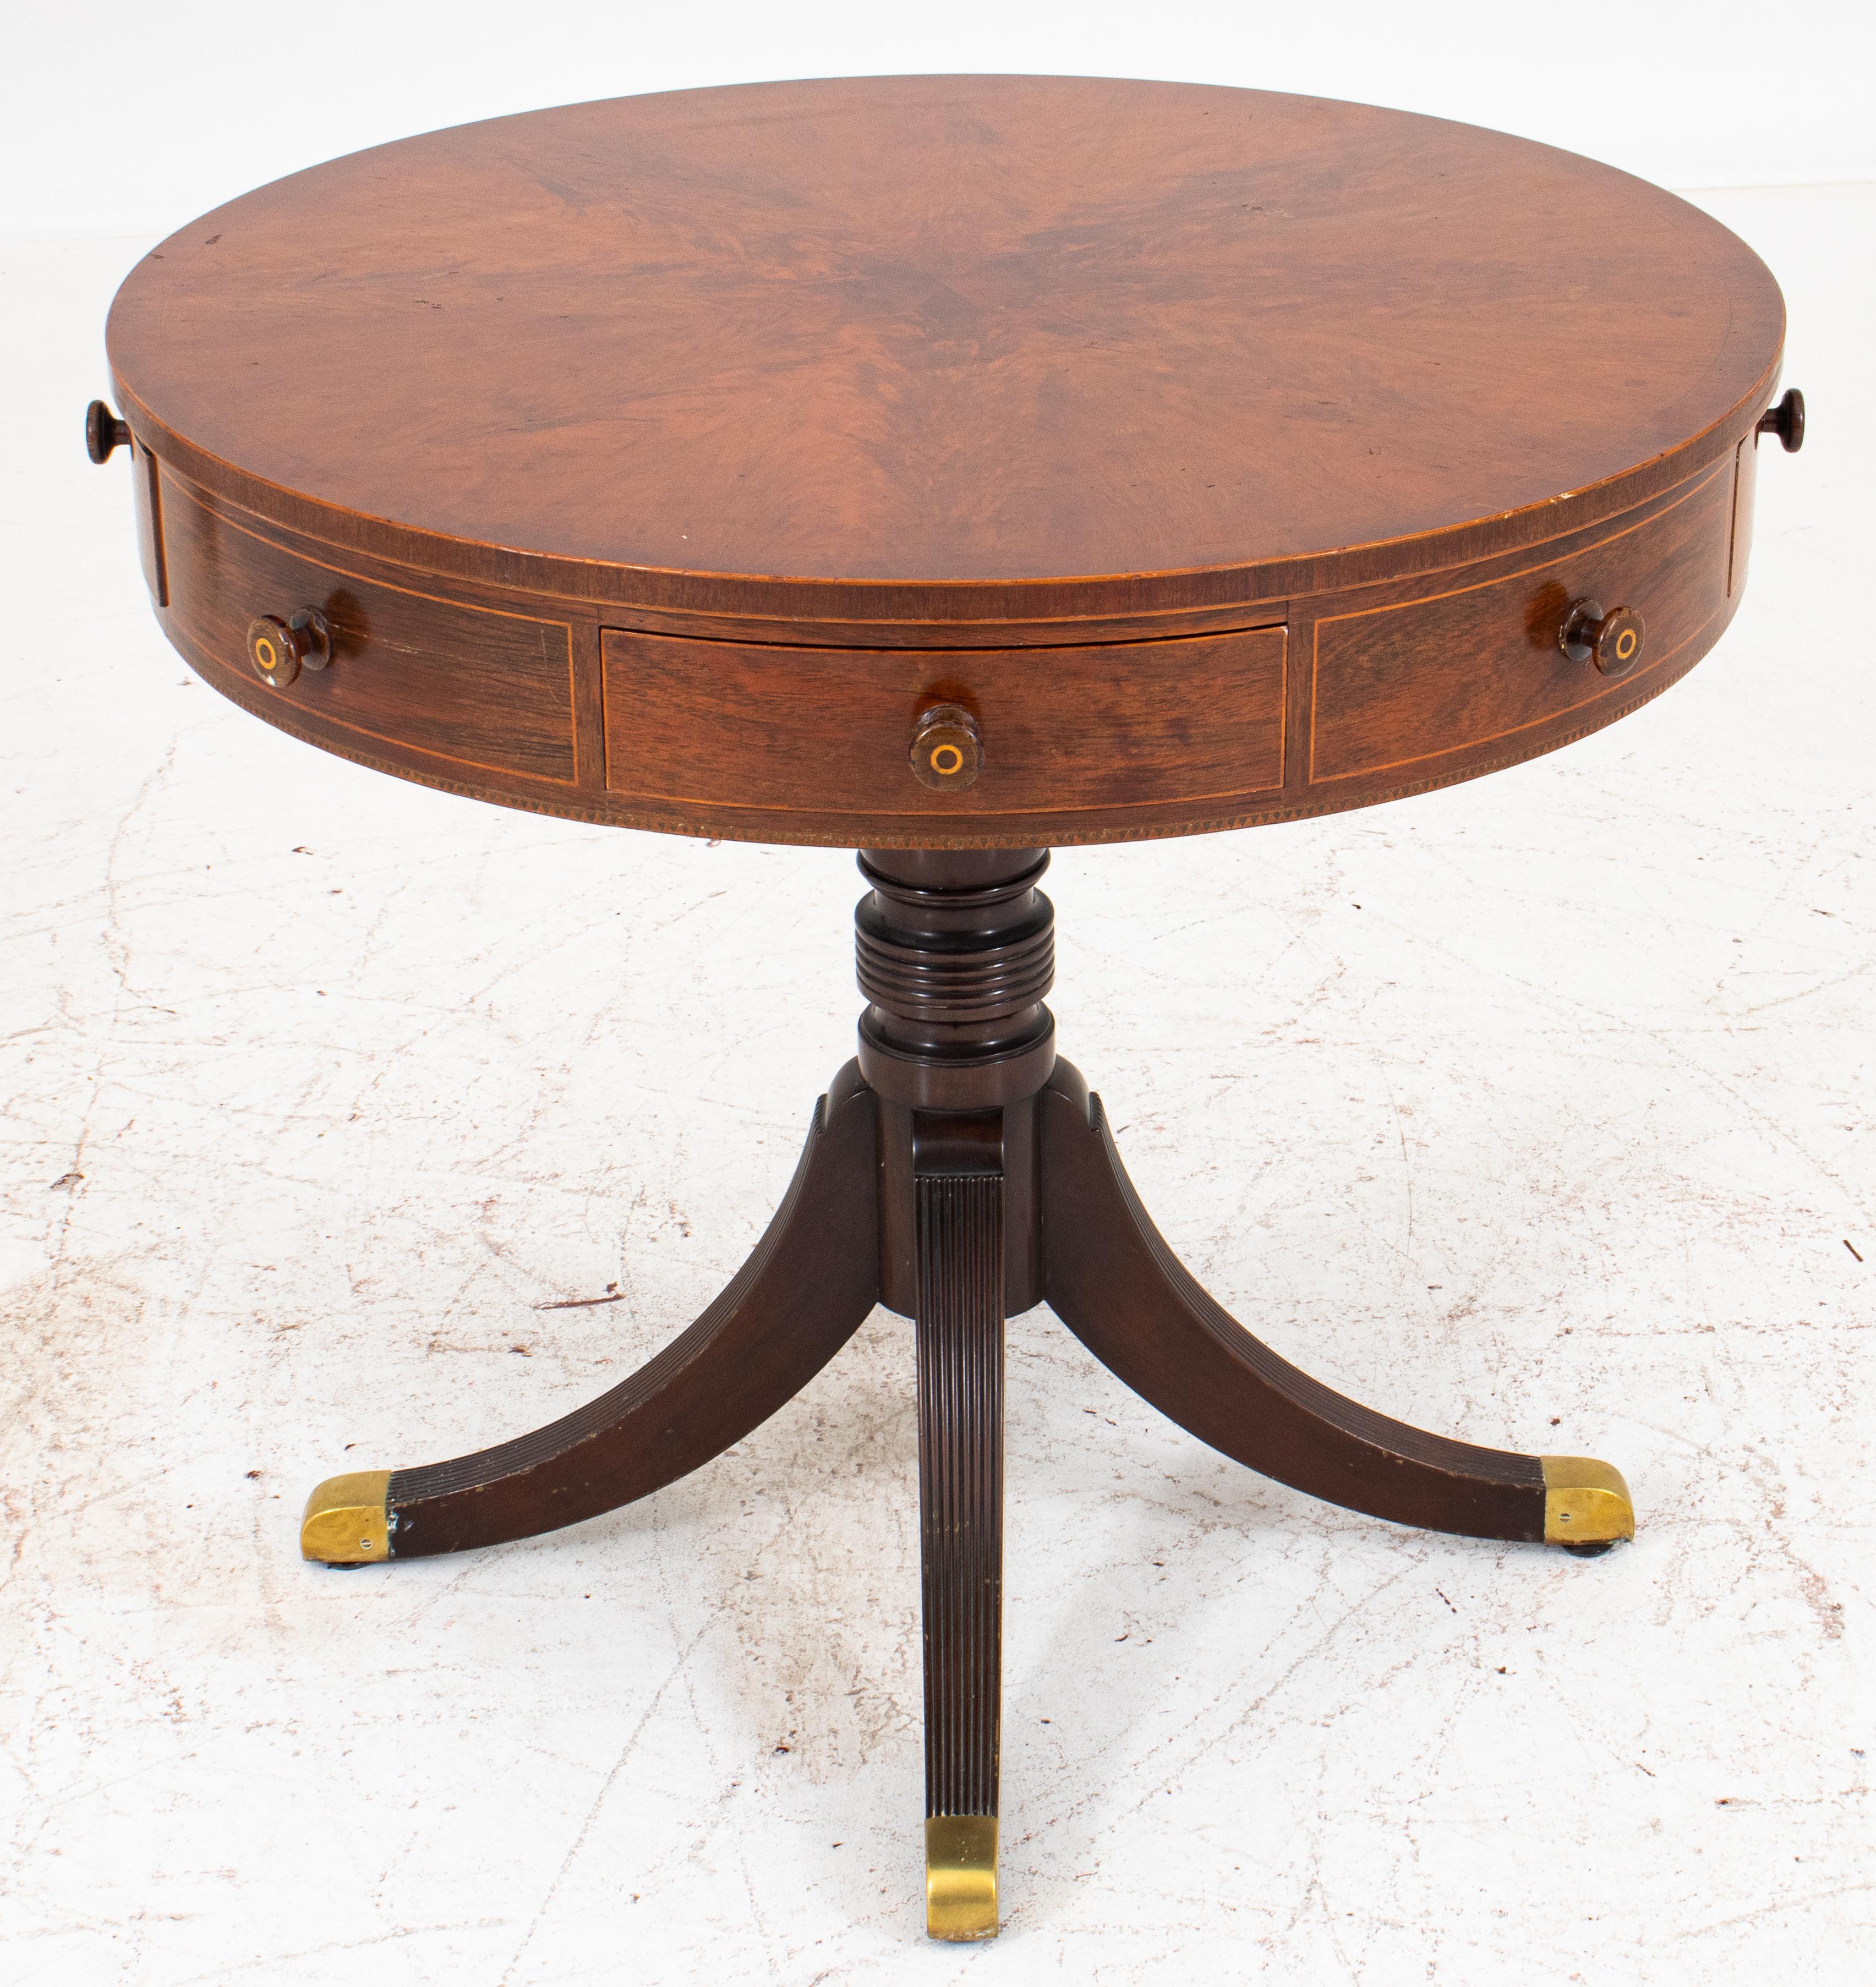 Regency style mahogany rent or drum table, circular, the apron containing four true and four false drawers, on a turned quadripedal base, reeded, and terminating in brass feet. Measures: 28.75